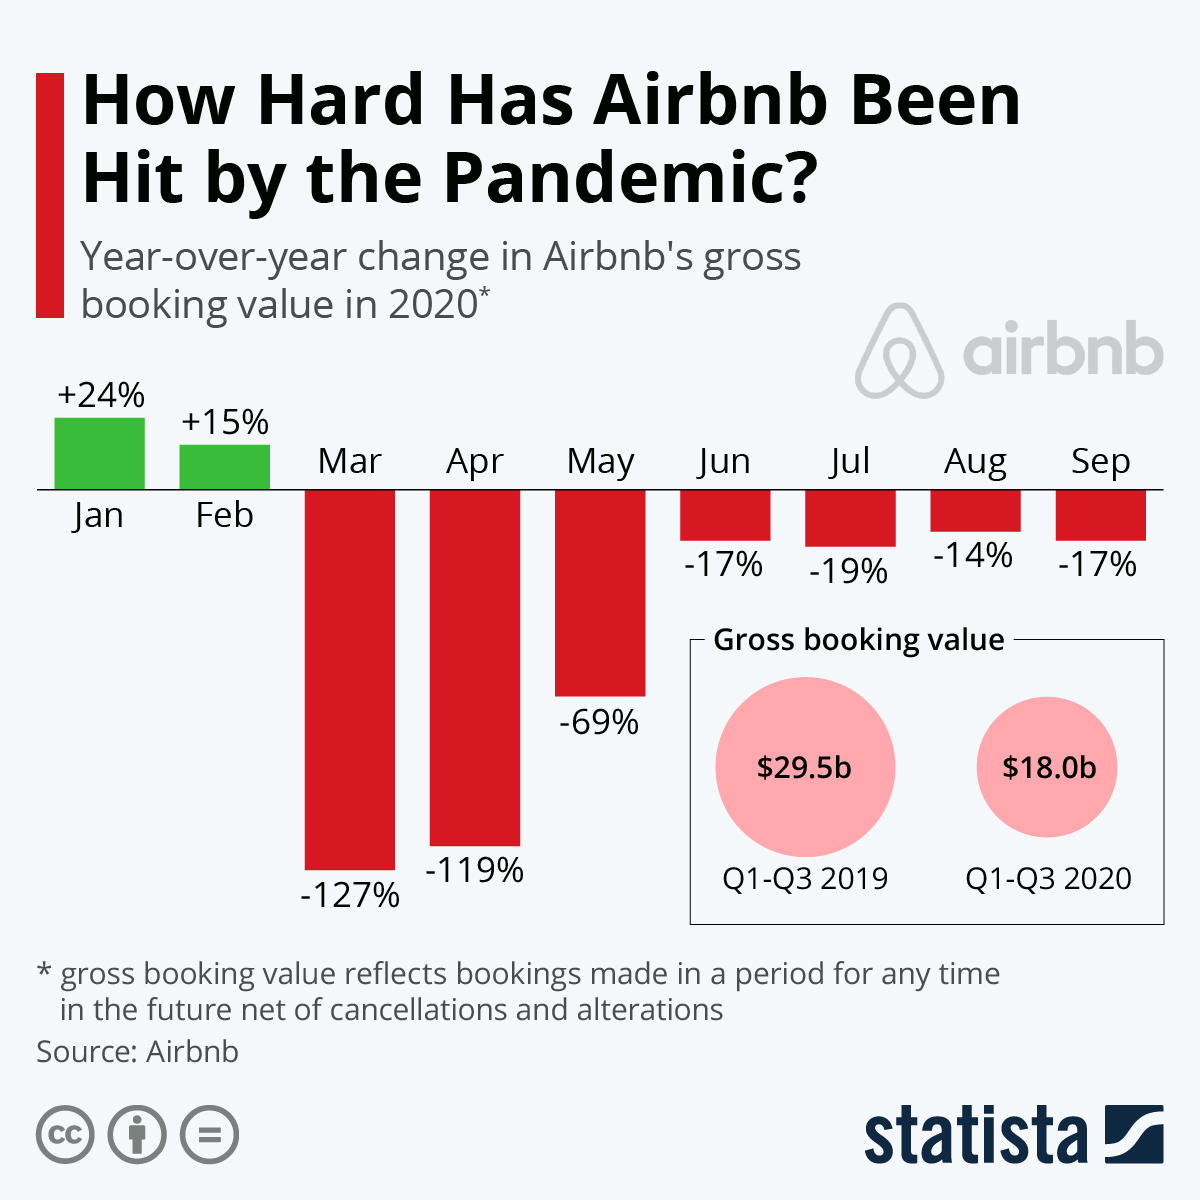 Airbnb got burned during the pandemic